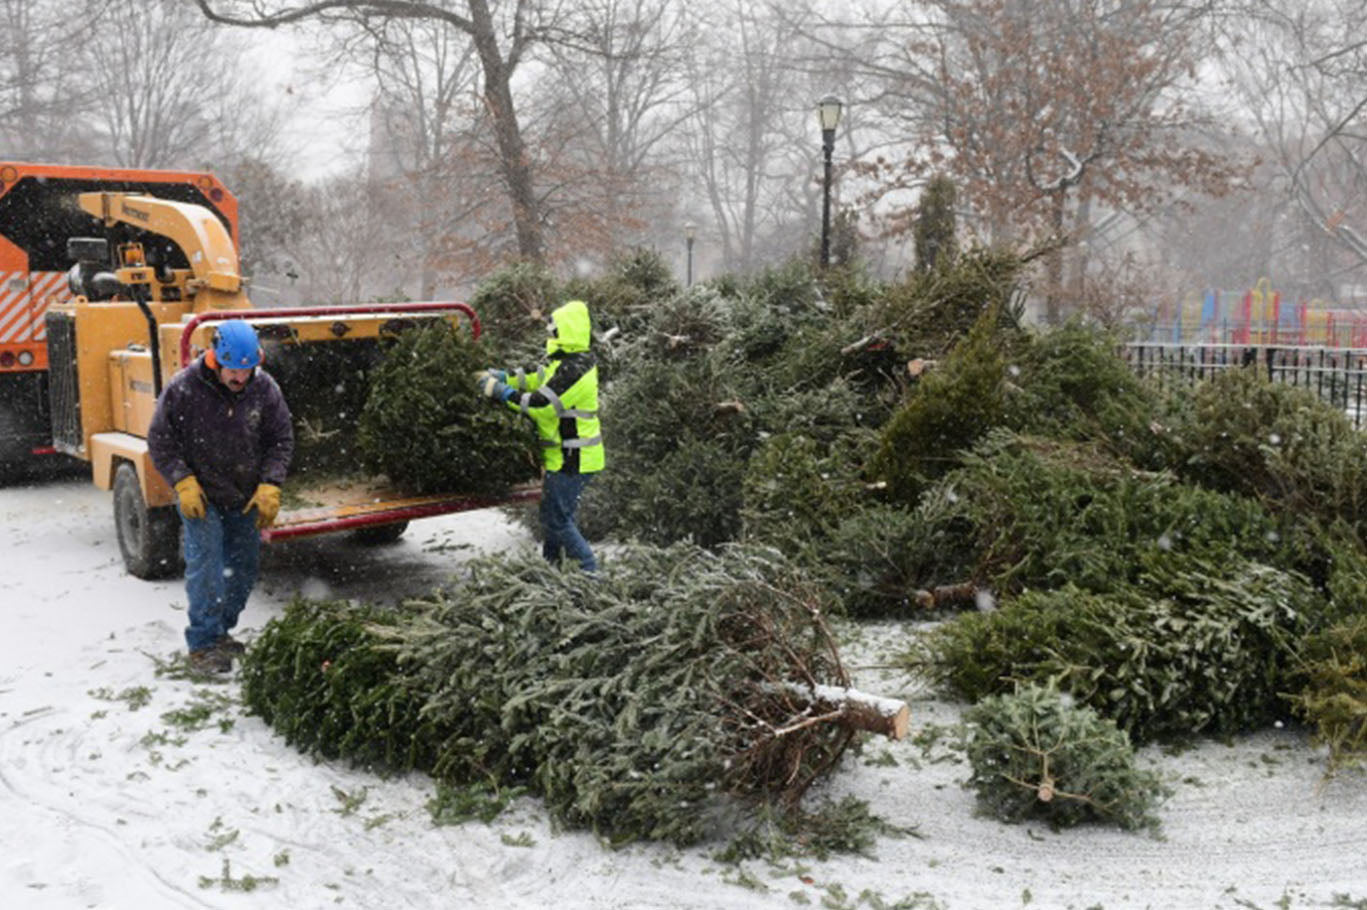 <p style="color:white;">Workers cutting down Christmas trees</p>